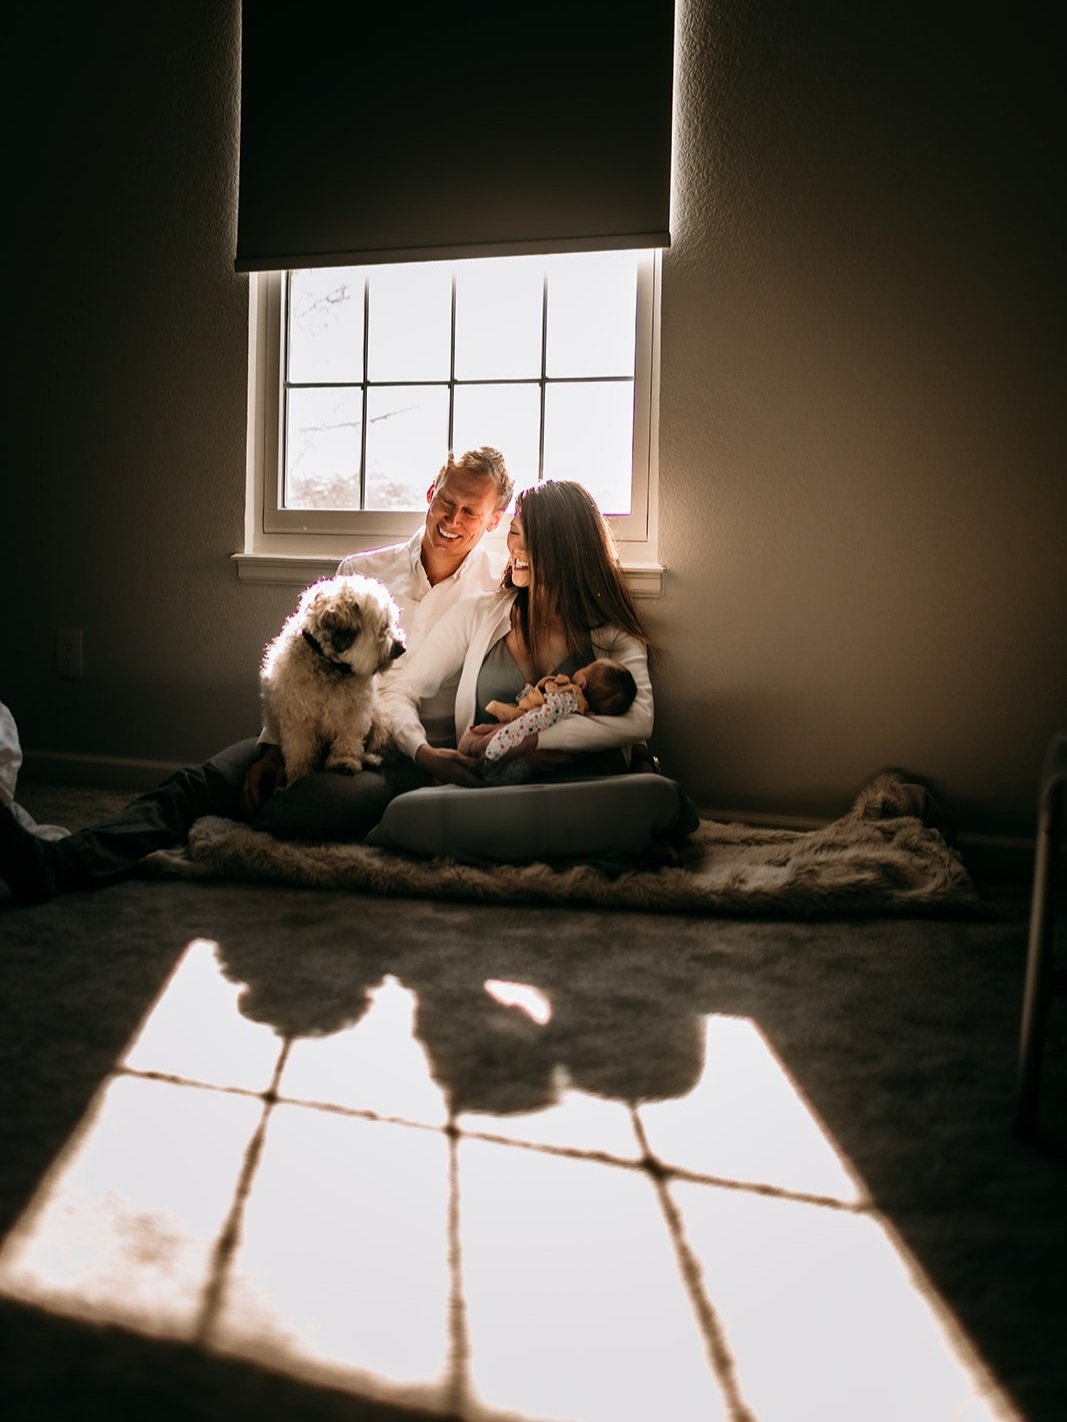 new-parents-sitting-in-light-with-baby-and-puppy.jpg